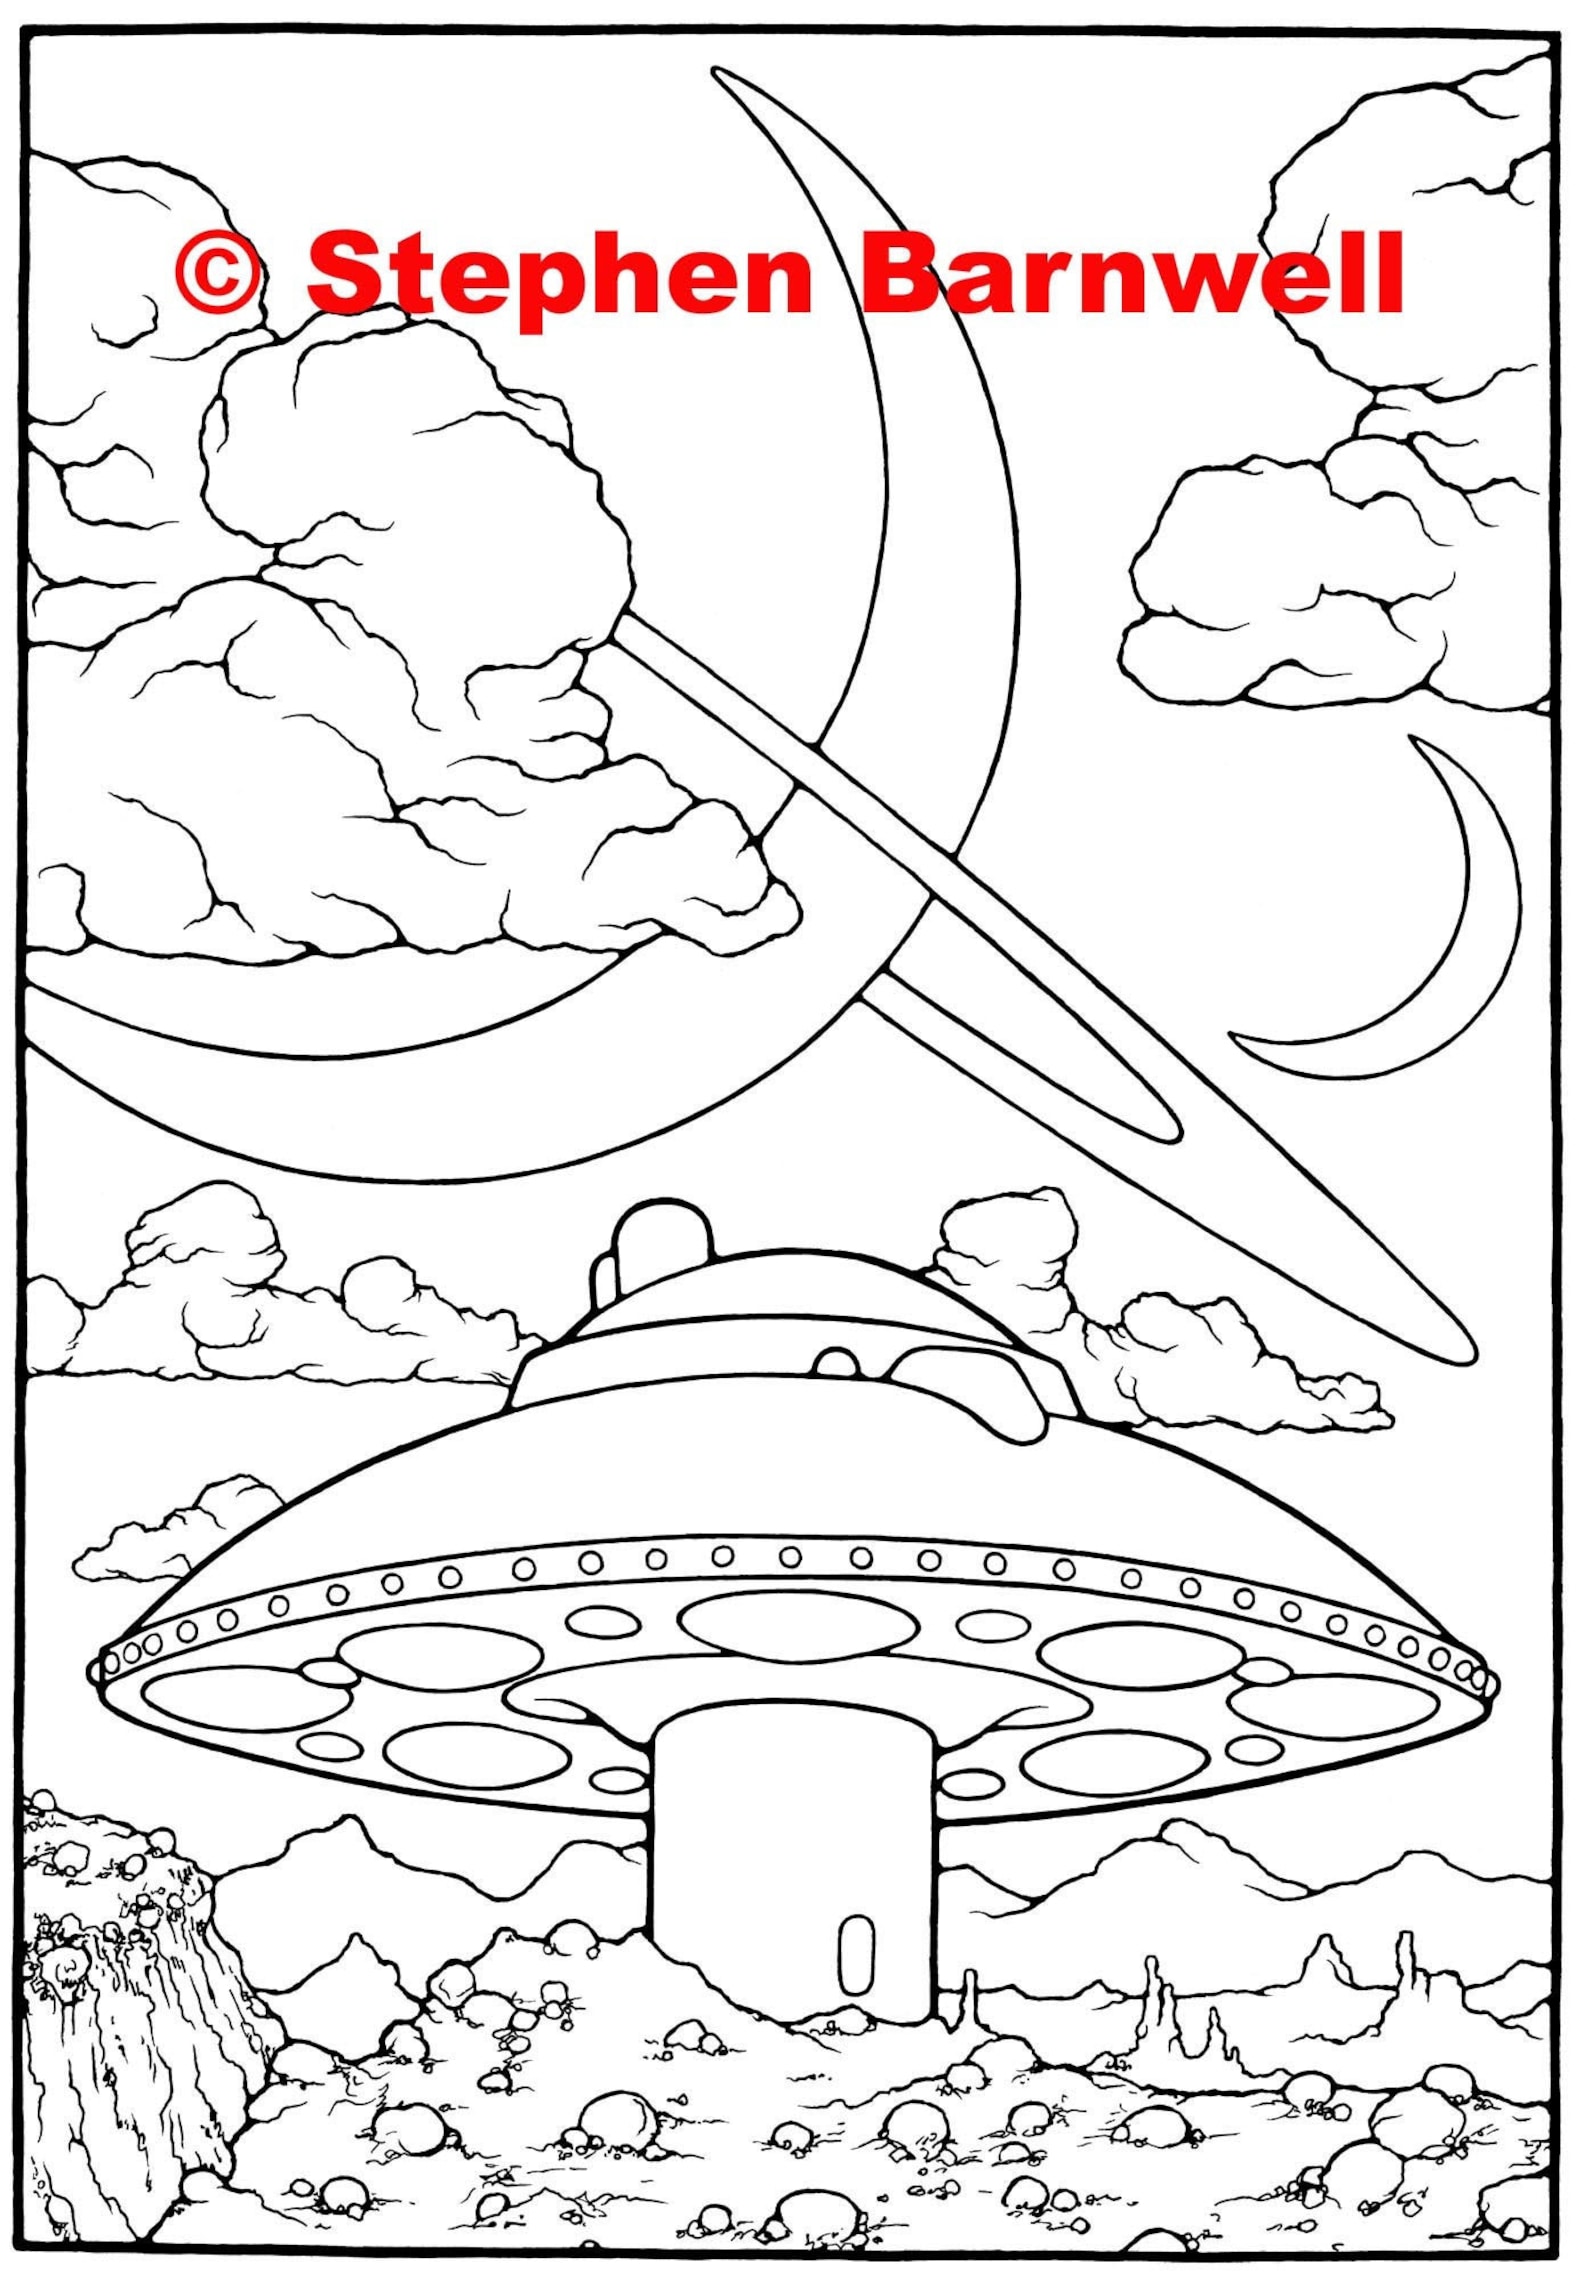 sci-fi-adult-coloring-page-flying-saucer-etsy